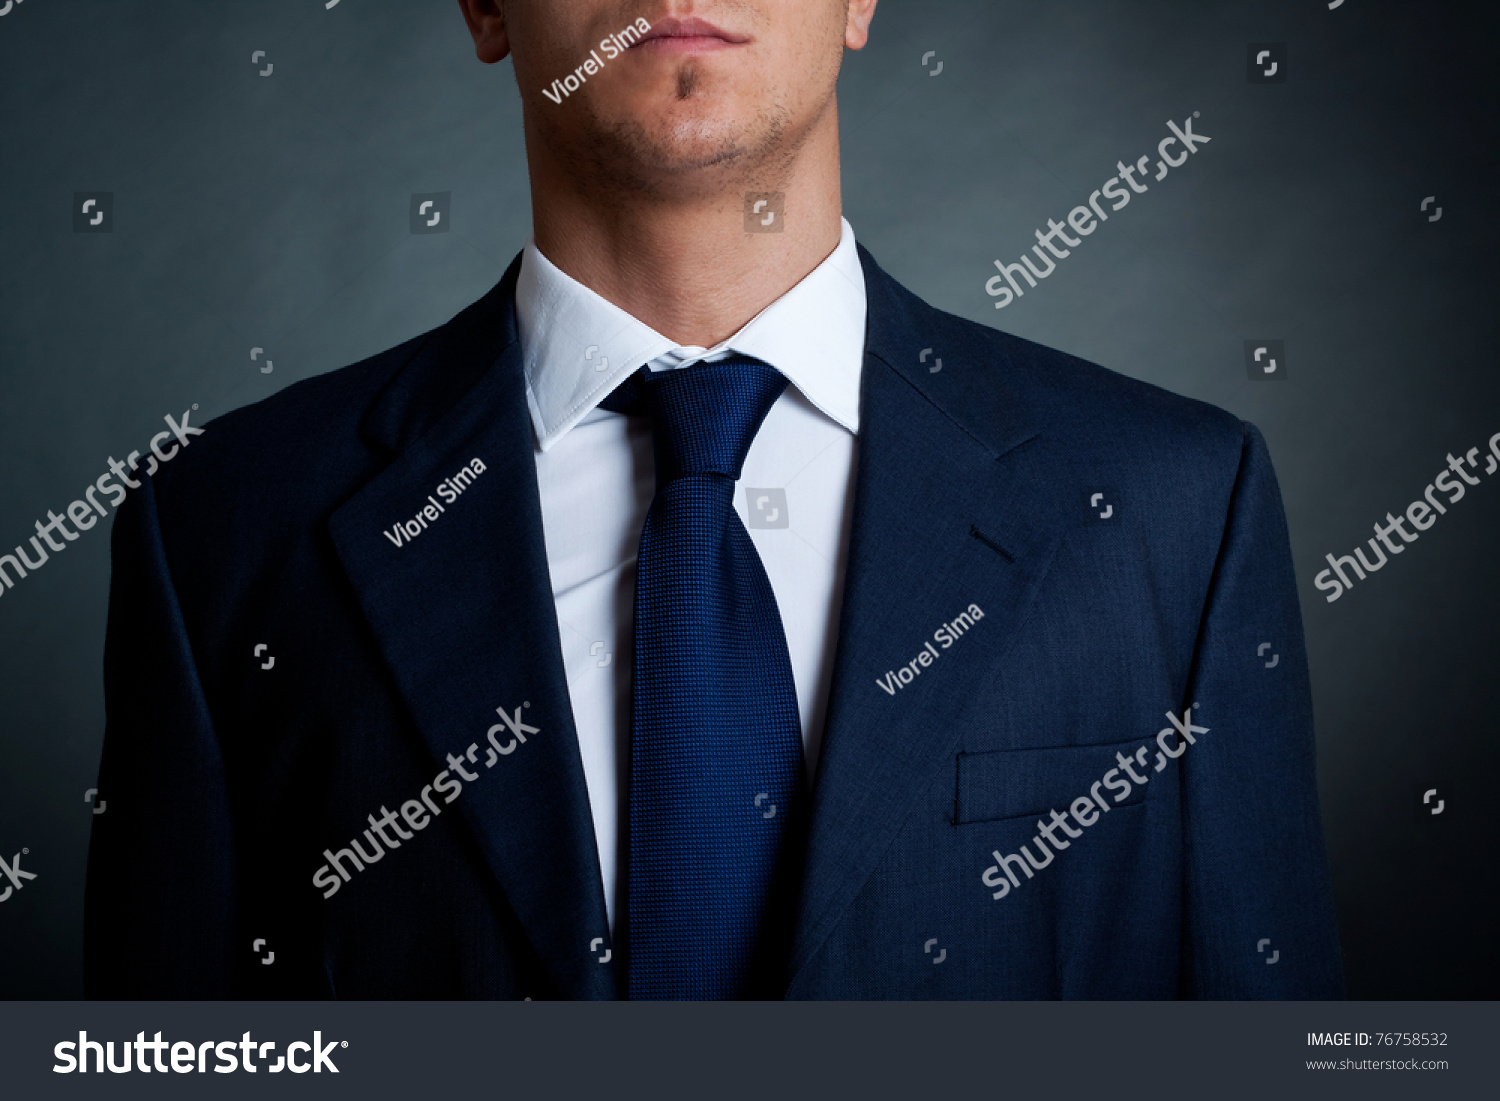 Closeup Shot Of Business Suit On A Man, Over Dark Background Stock ...